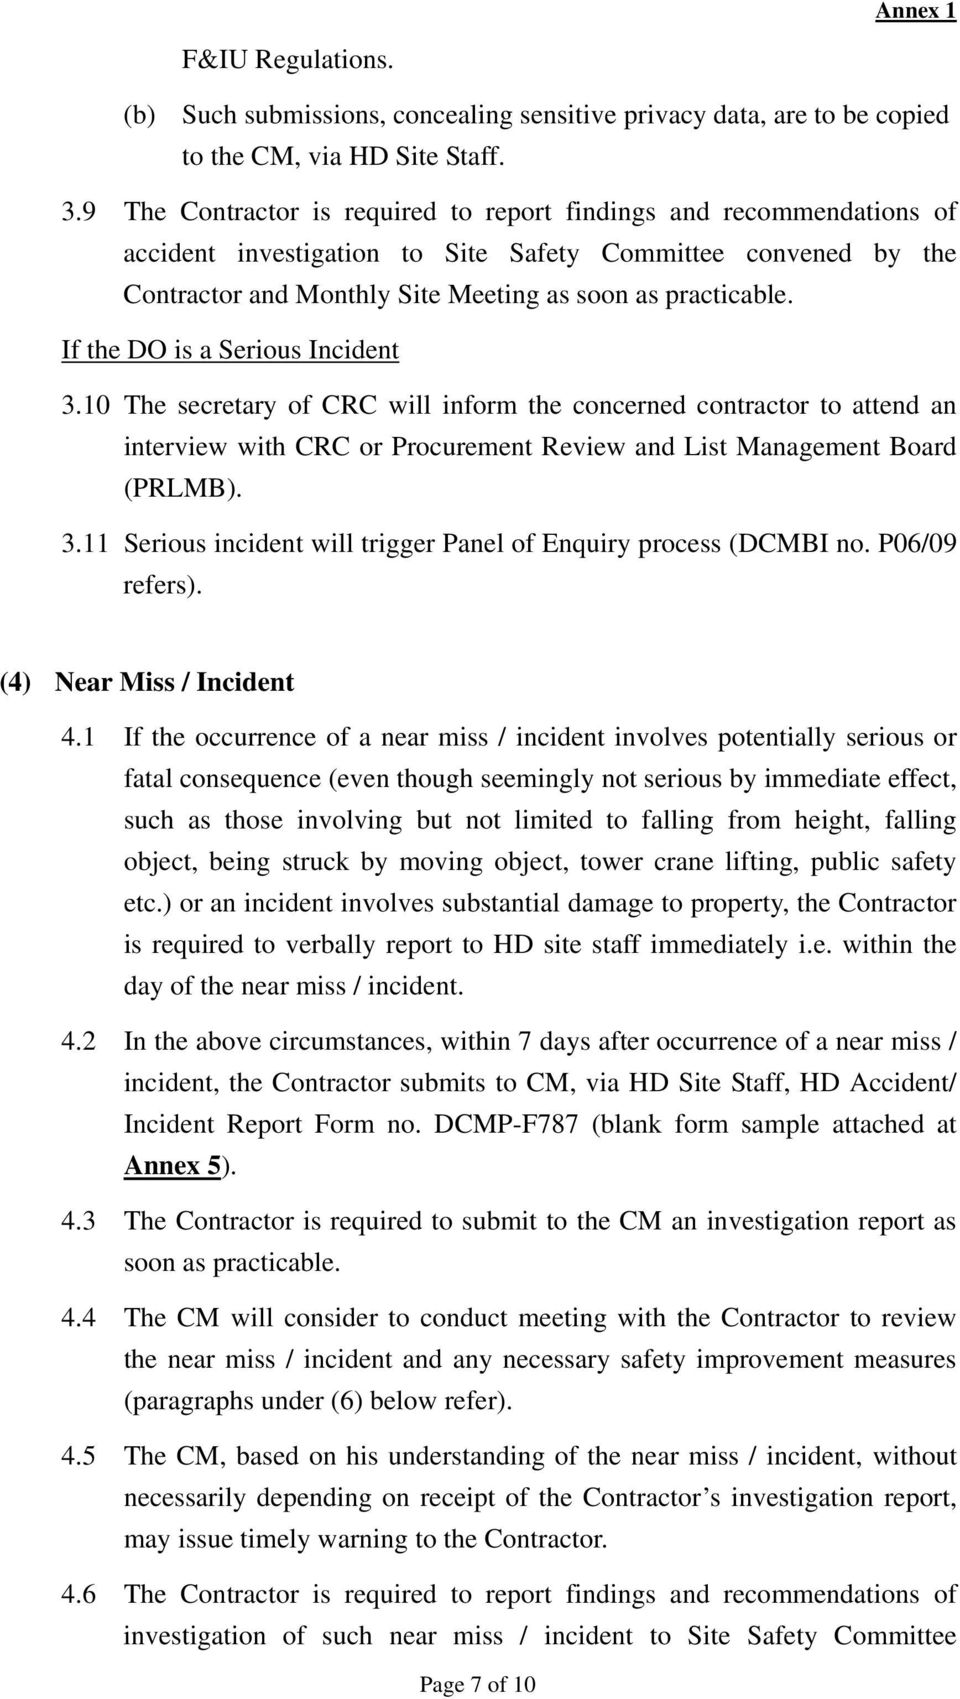 If the DO is a Serious Incident 3.10 The secretary of CRC will inform the concerned contractor to attend an interview with CRC or Procurement Review and List Management Board (PRLMB). 3.11 Serious incident will trigger Panel of Enquiry process (DCMBI no.